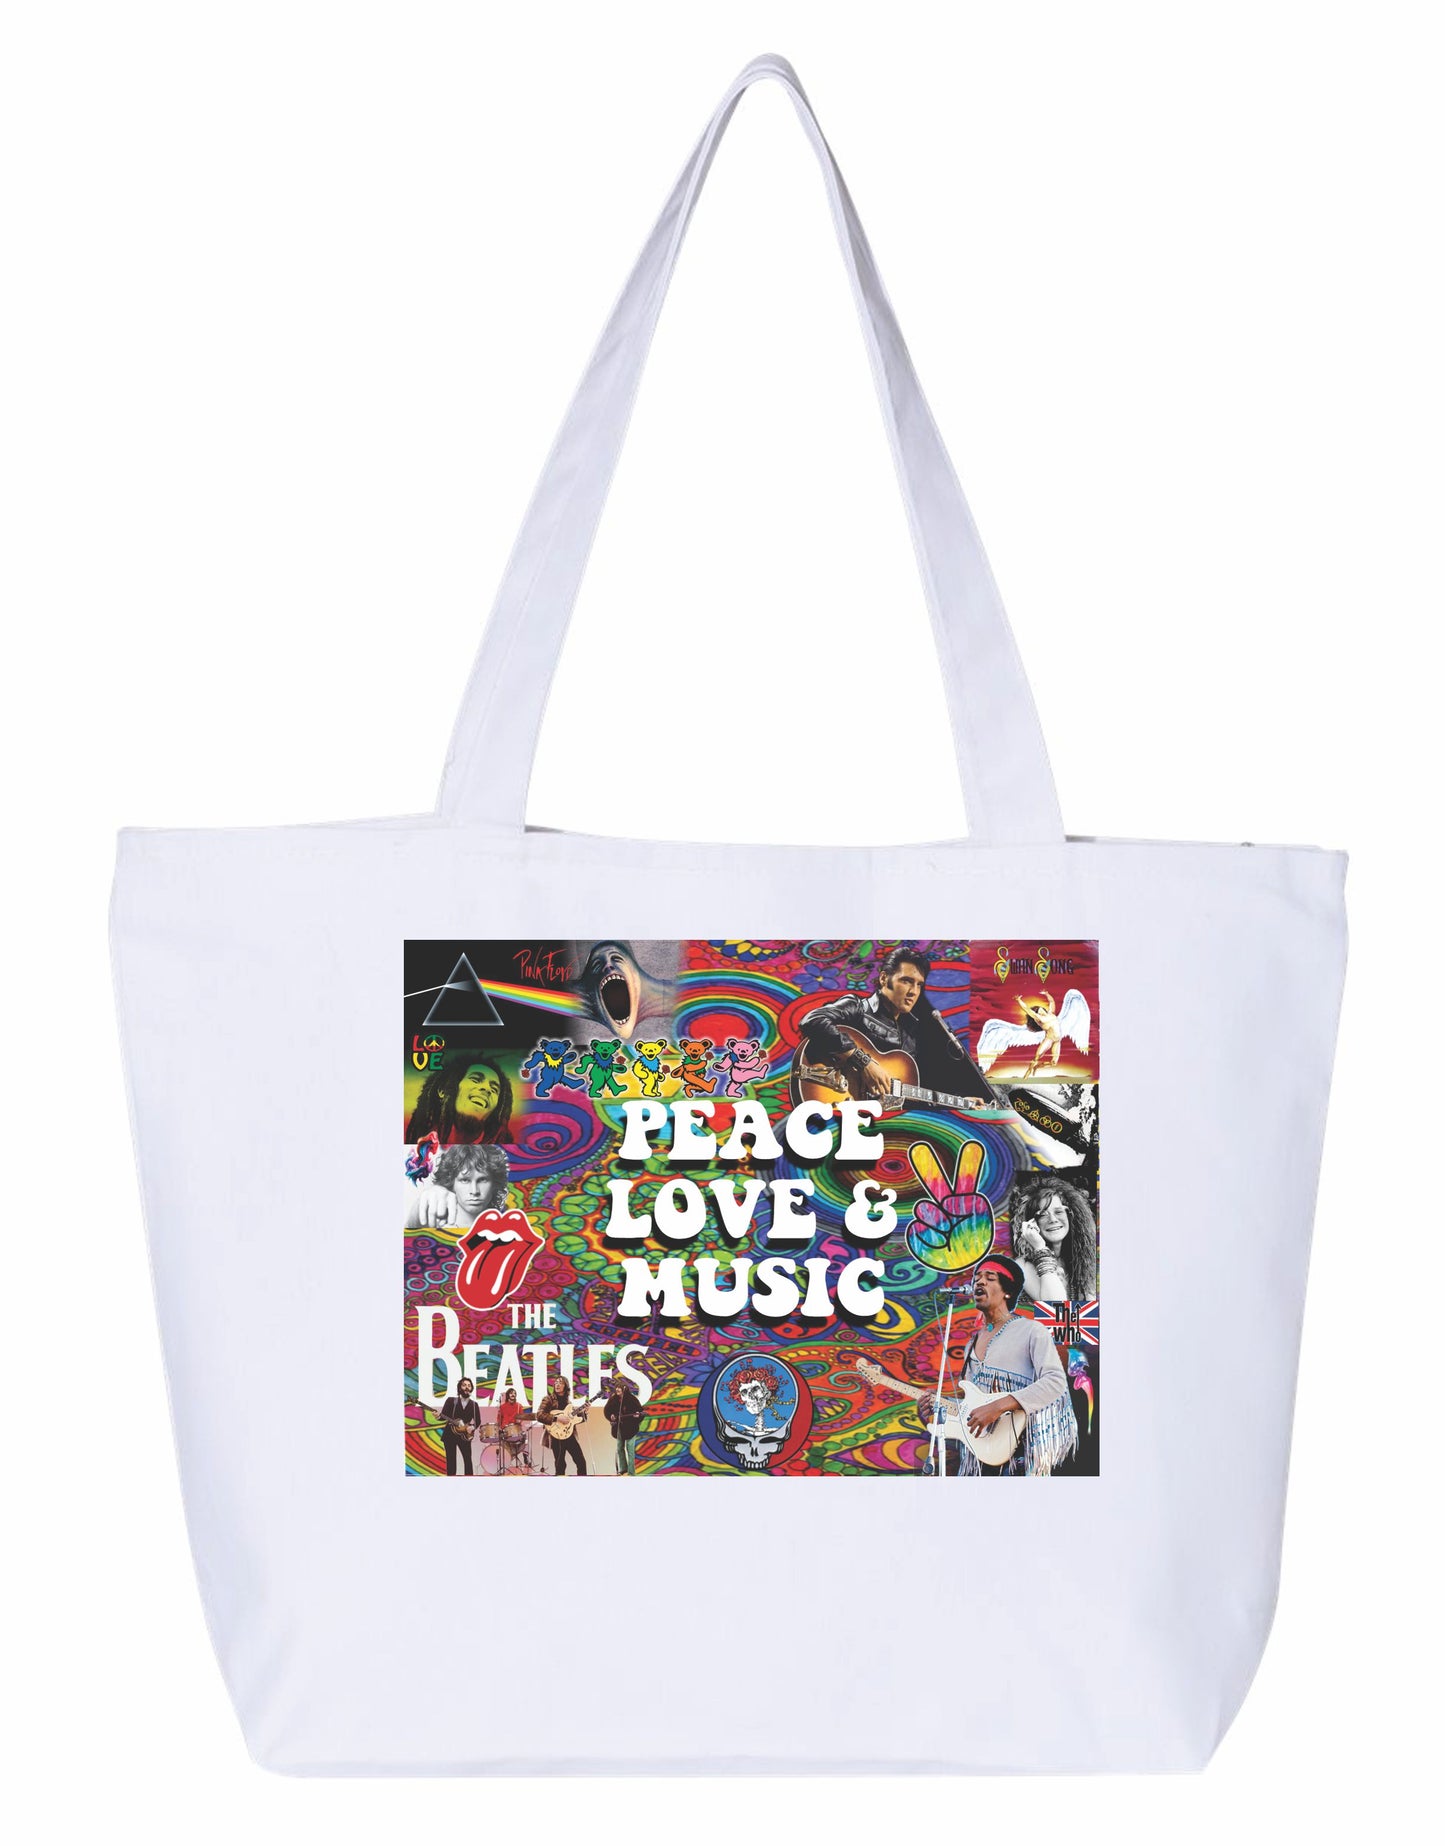 Peace love & music Heavy weight cotton canvas large zippered hippie decorated tote bag legends of rock design